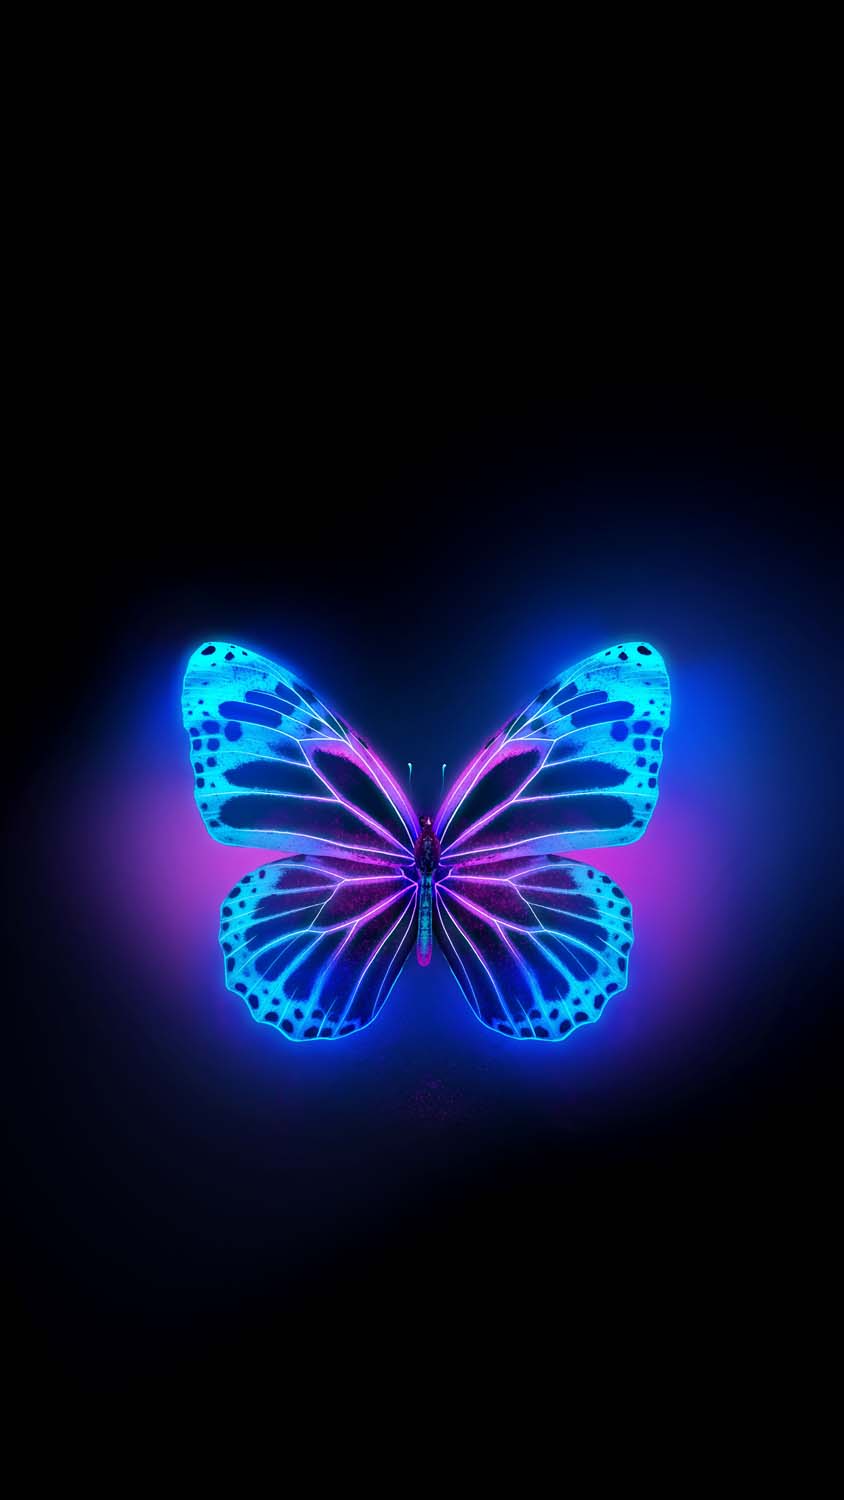 Butterfly On Flower IPhone Wallpaper HD  IPhone Wallpapers  iPhone  Wallpapers